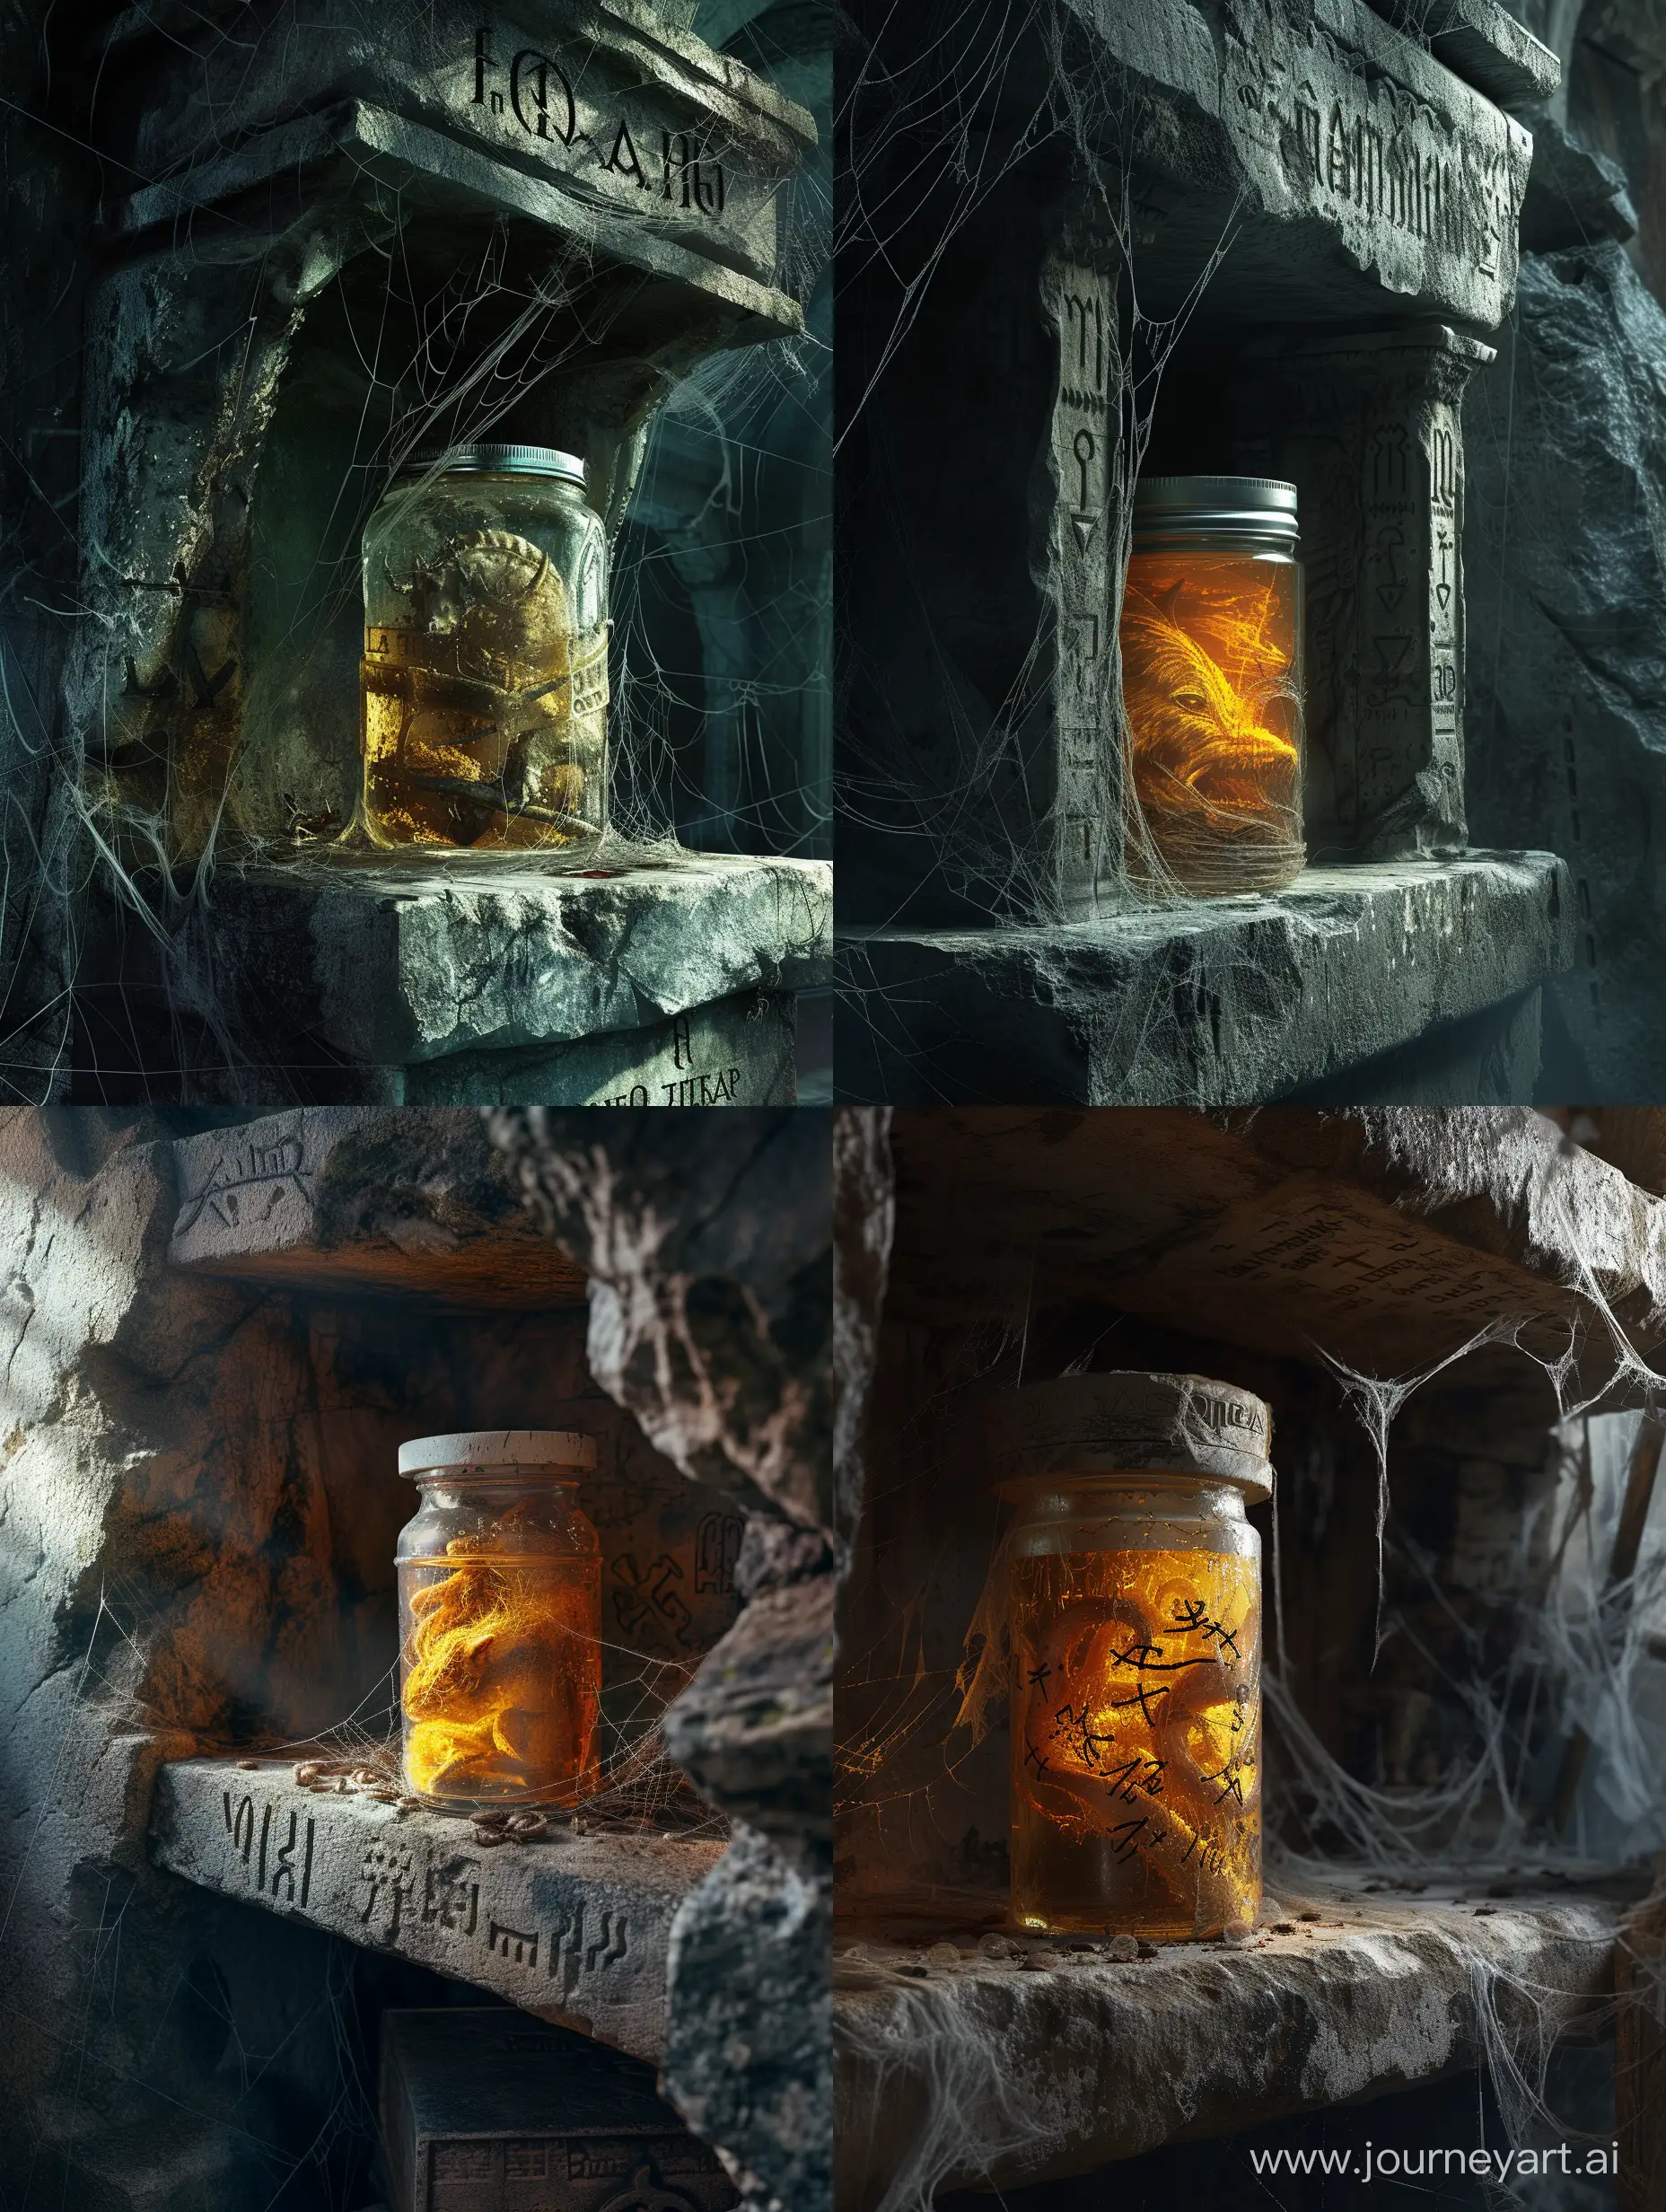 Ancient dark World with Ancient beasts in alcohol inside a jar,on ancient stone shelf,cobwebs everywhere,runic script,incredible detail,terrifying.